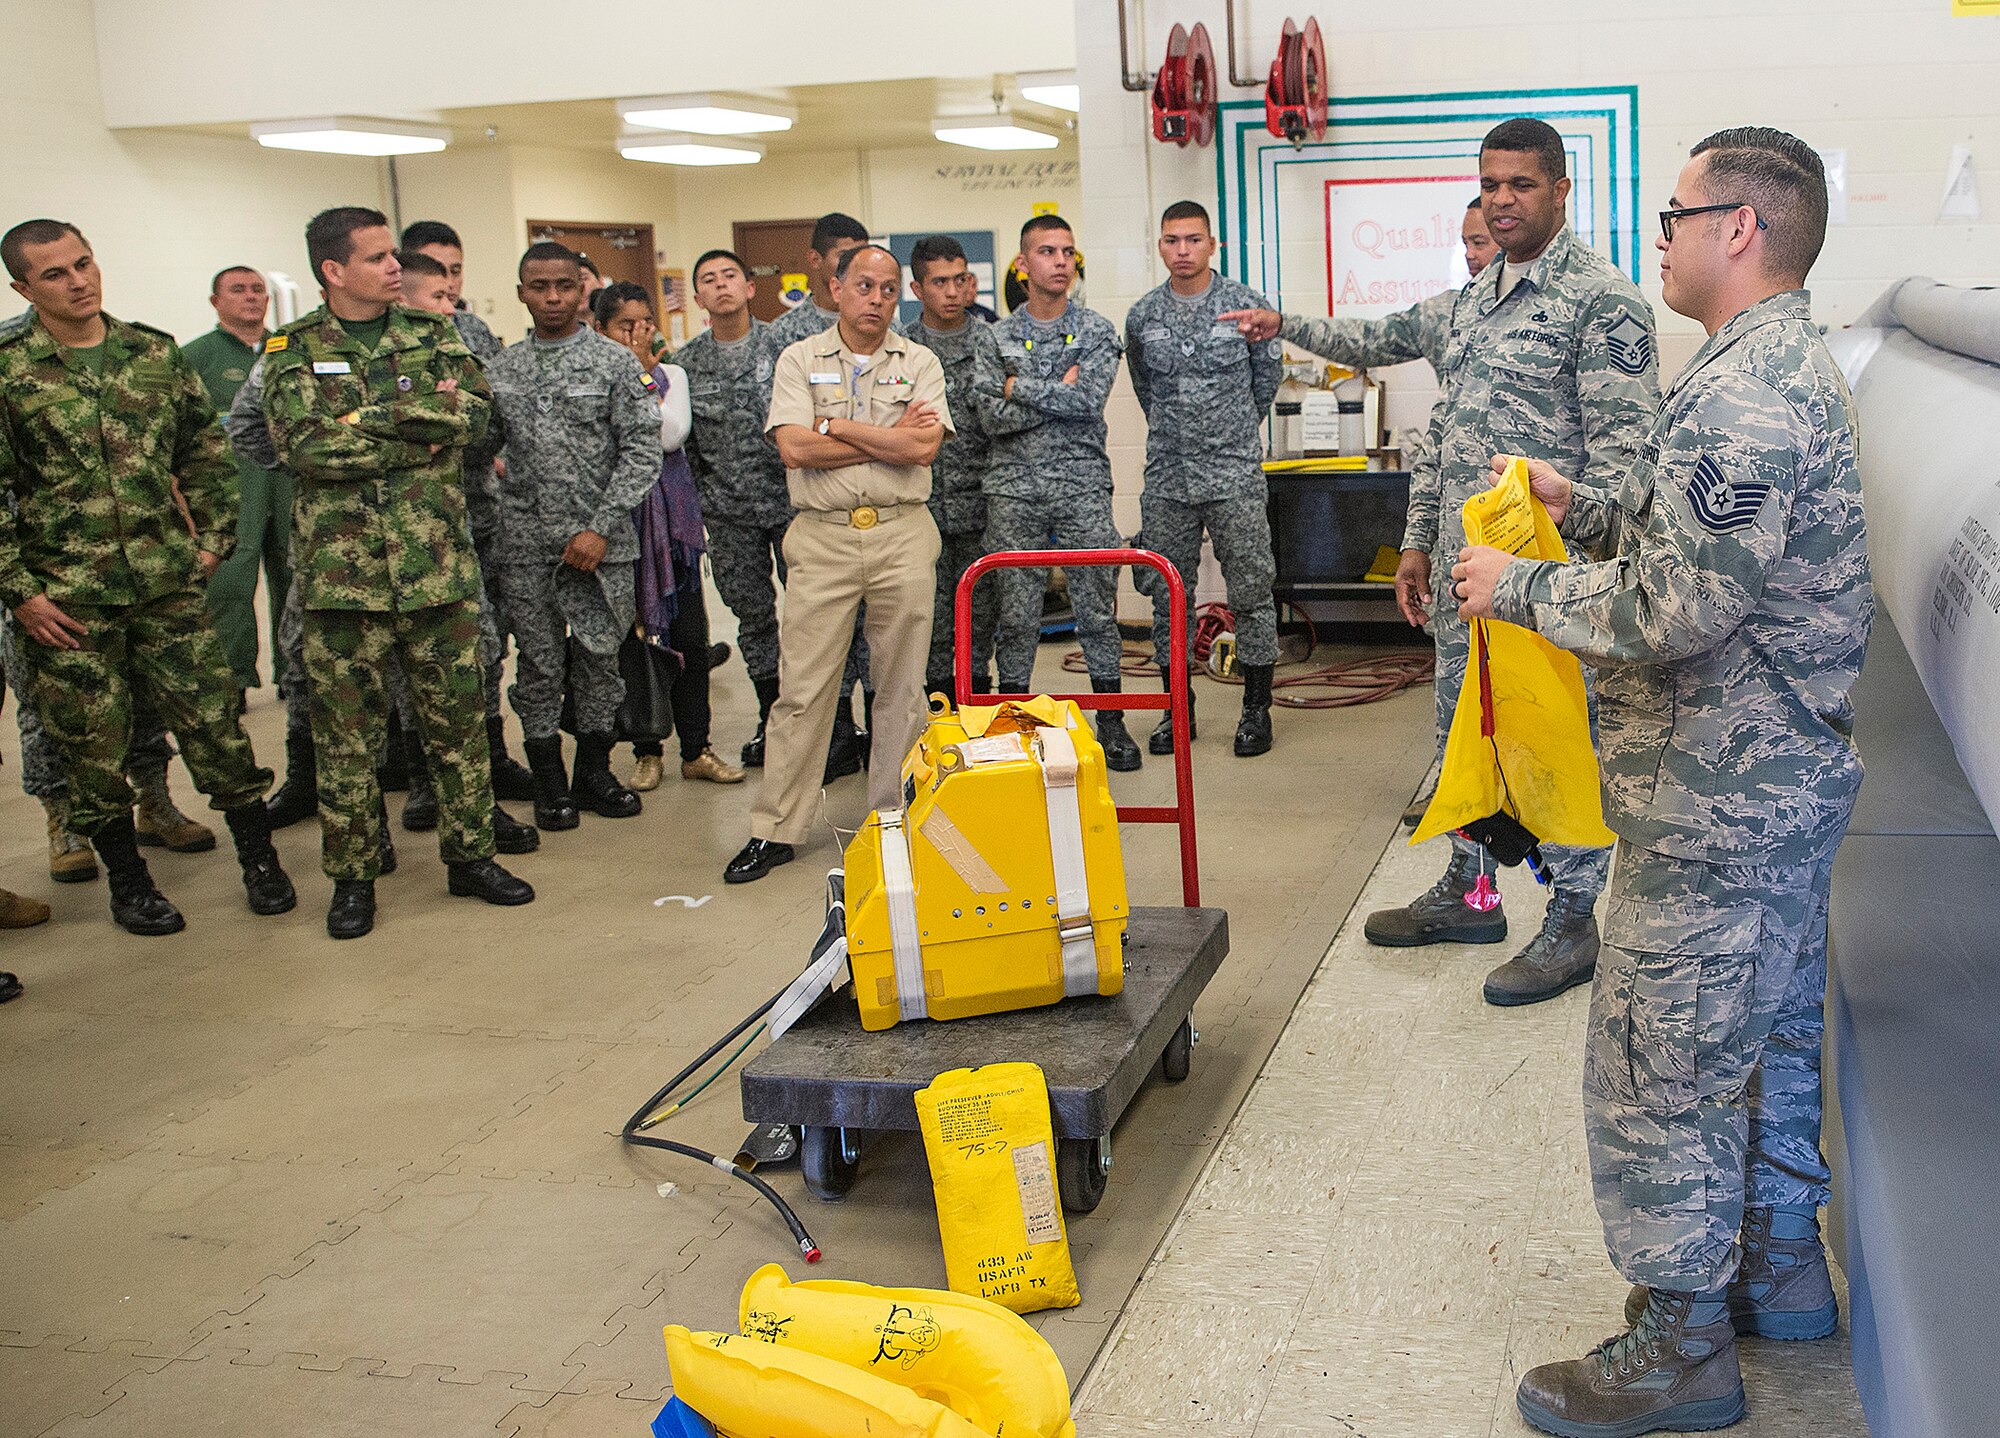 Tech. Sgt. Martin Alvarez, 433rd Operations Support Squadron aircrew flight equipment, shows students from the  Inter-American Air Forces Academy how to properly inflate a life preserver in the event of an emergency water egress March 29, 2017 at Joint Base San Antonio-Lackland, Texas. As part of their tour the students toured a C-5M Super Galaxy aircraft and visited structural, metals, and survival shops.  (U.S. Air Force photo by Benjamin Faske)